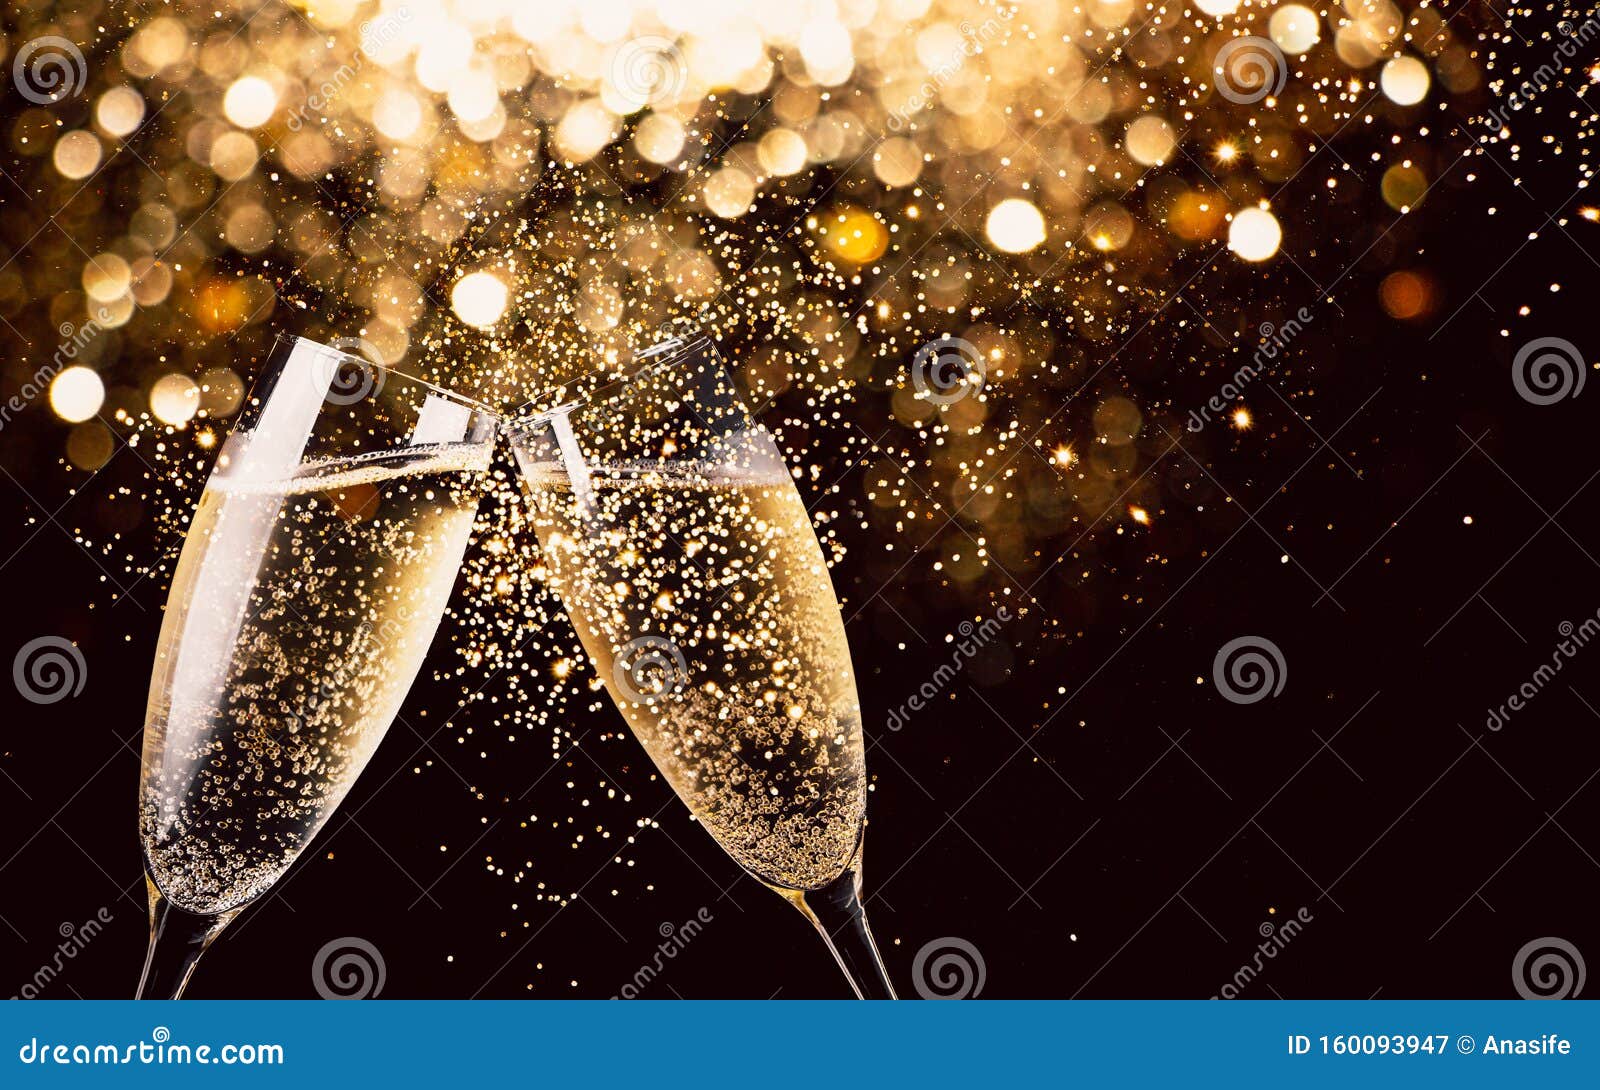 Happy Celebration Toast with Champagne Stock Image of champagne, 160093947